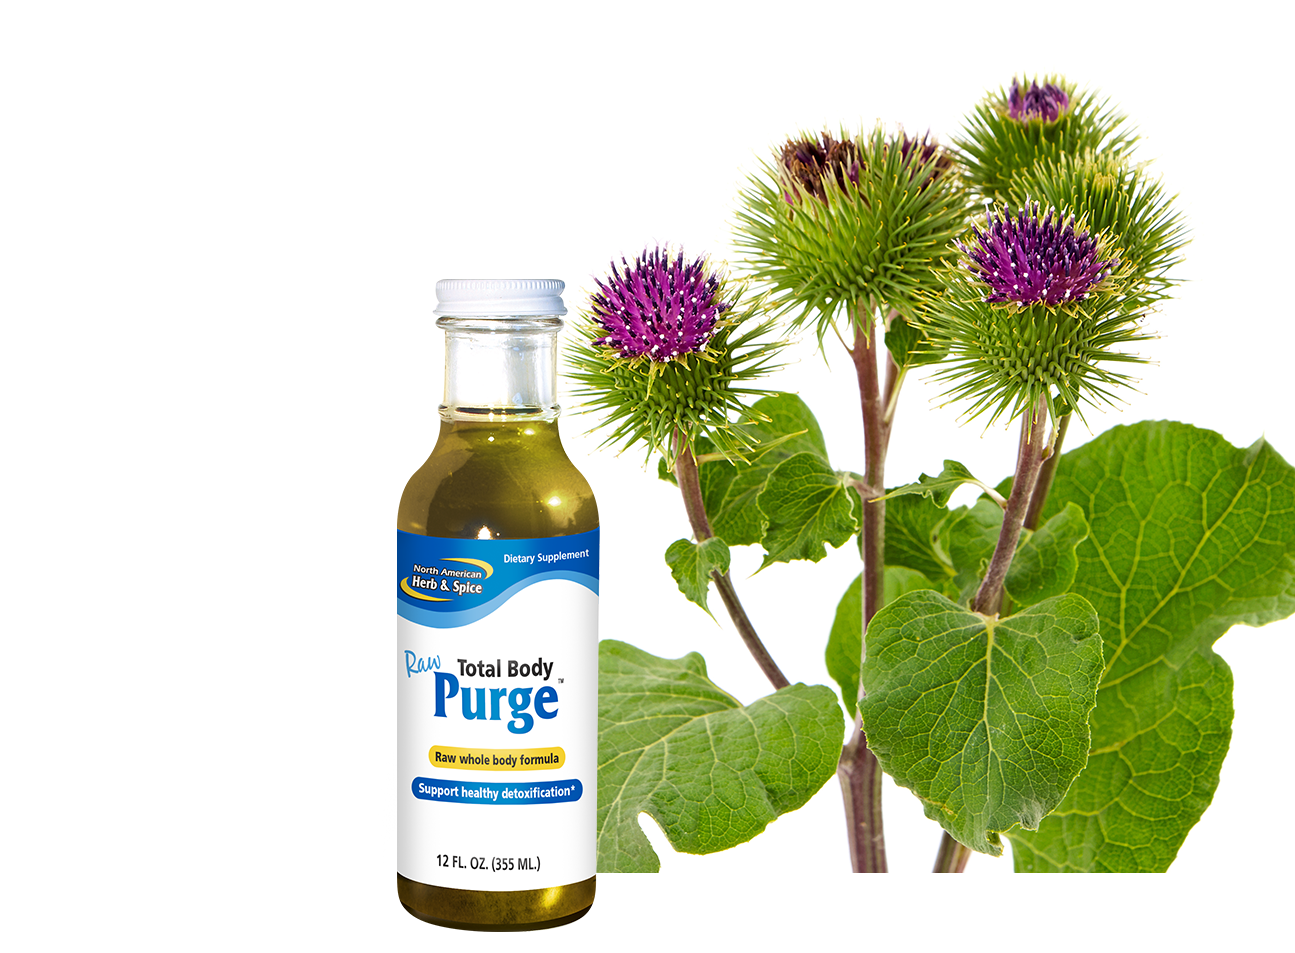 Burdock ingredient with Total Body Purge product